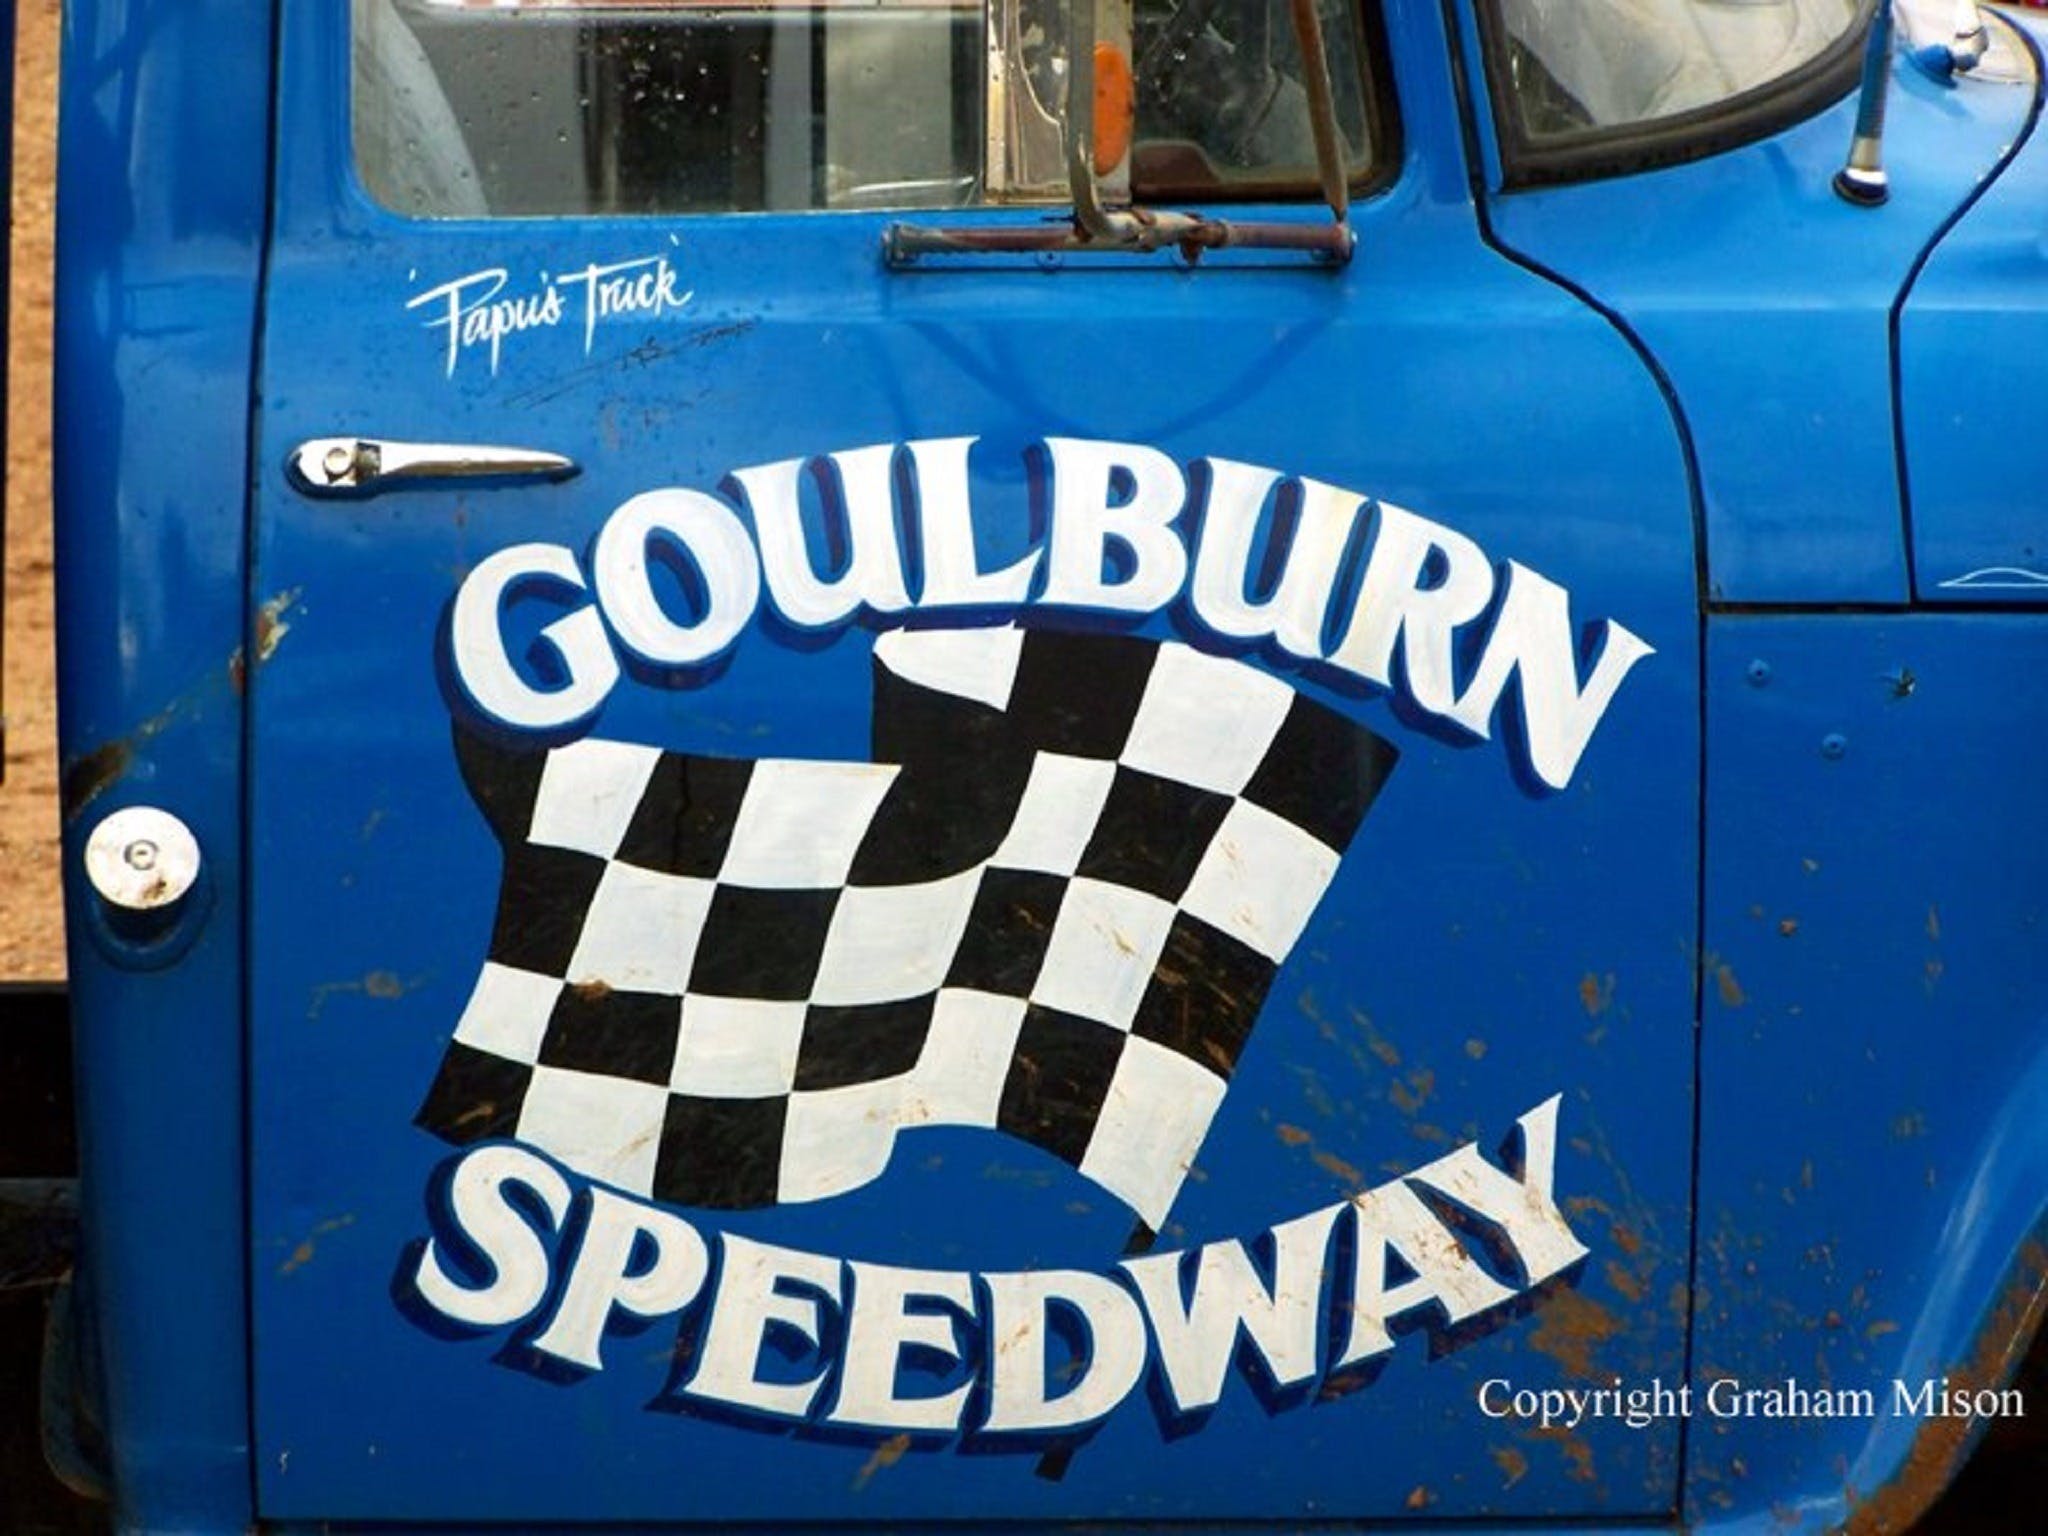 50 years of racing at Goulburn Speedway - Townsville Tourism